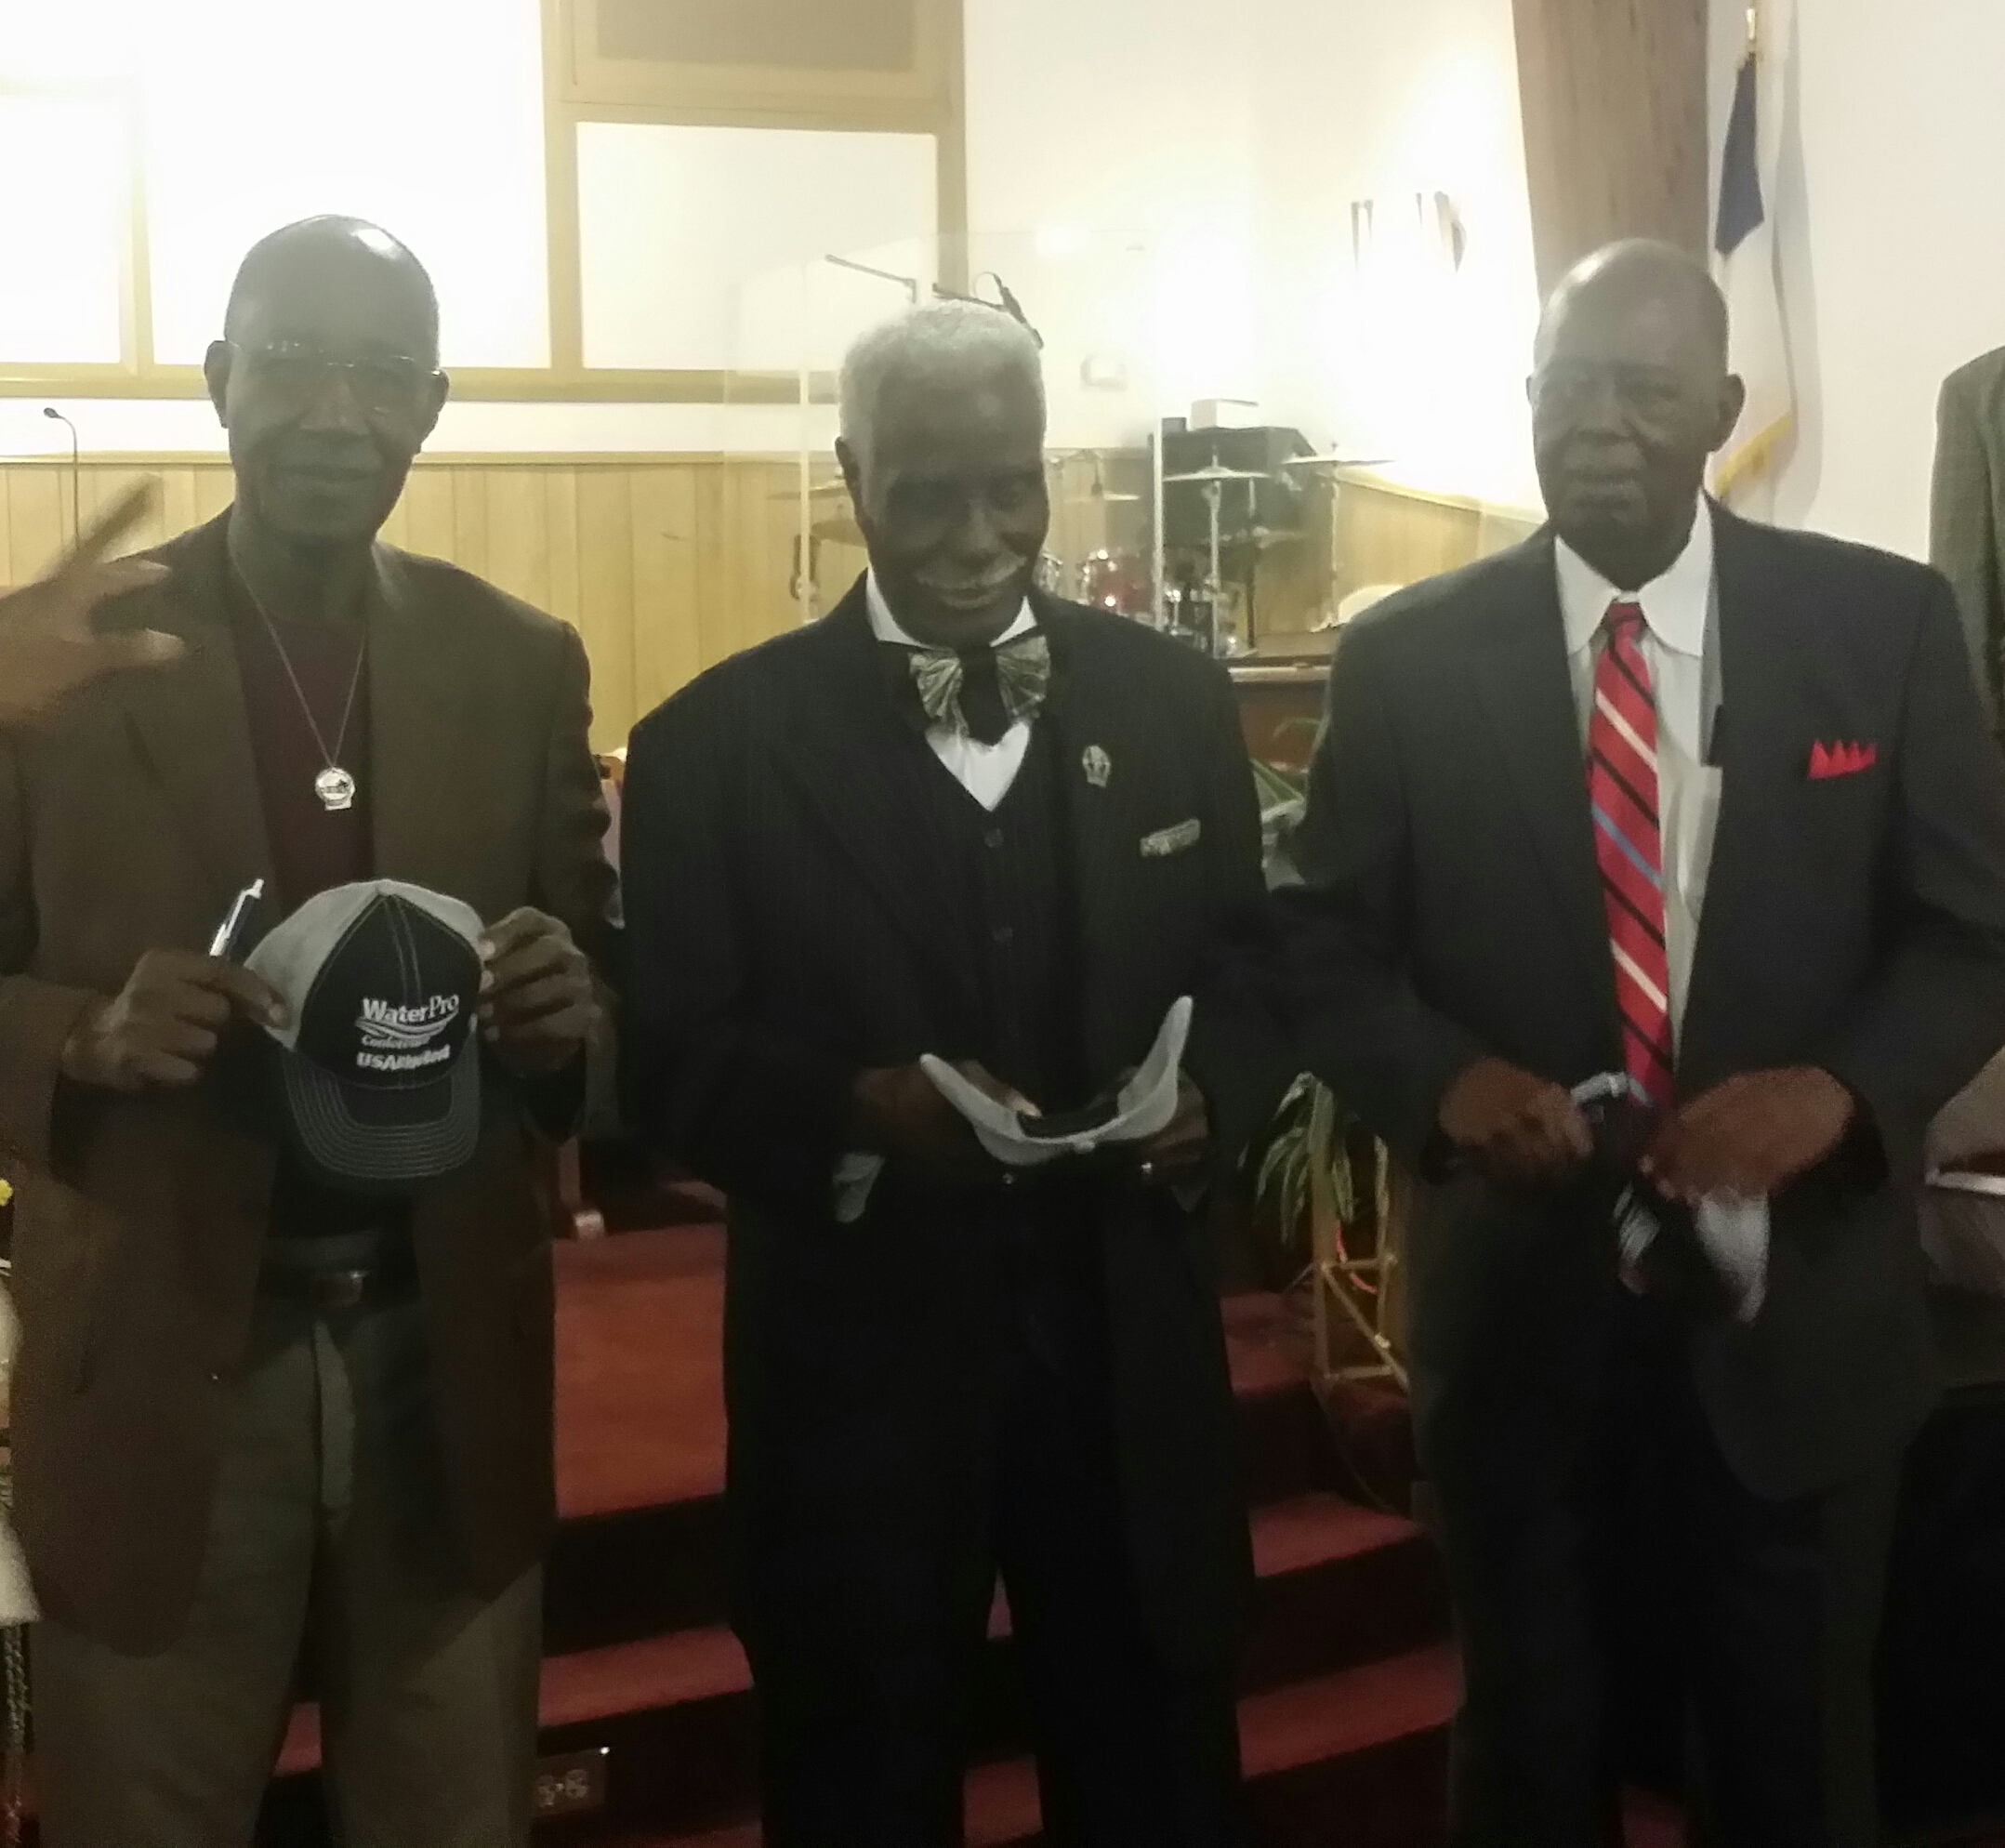 Caps of Wisdom presented to Elderly Deacons for their Service 2018